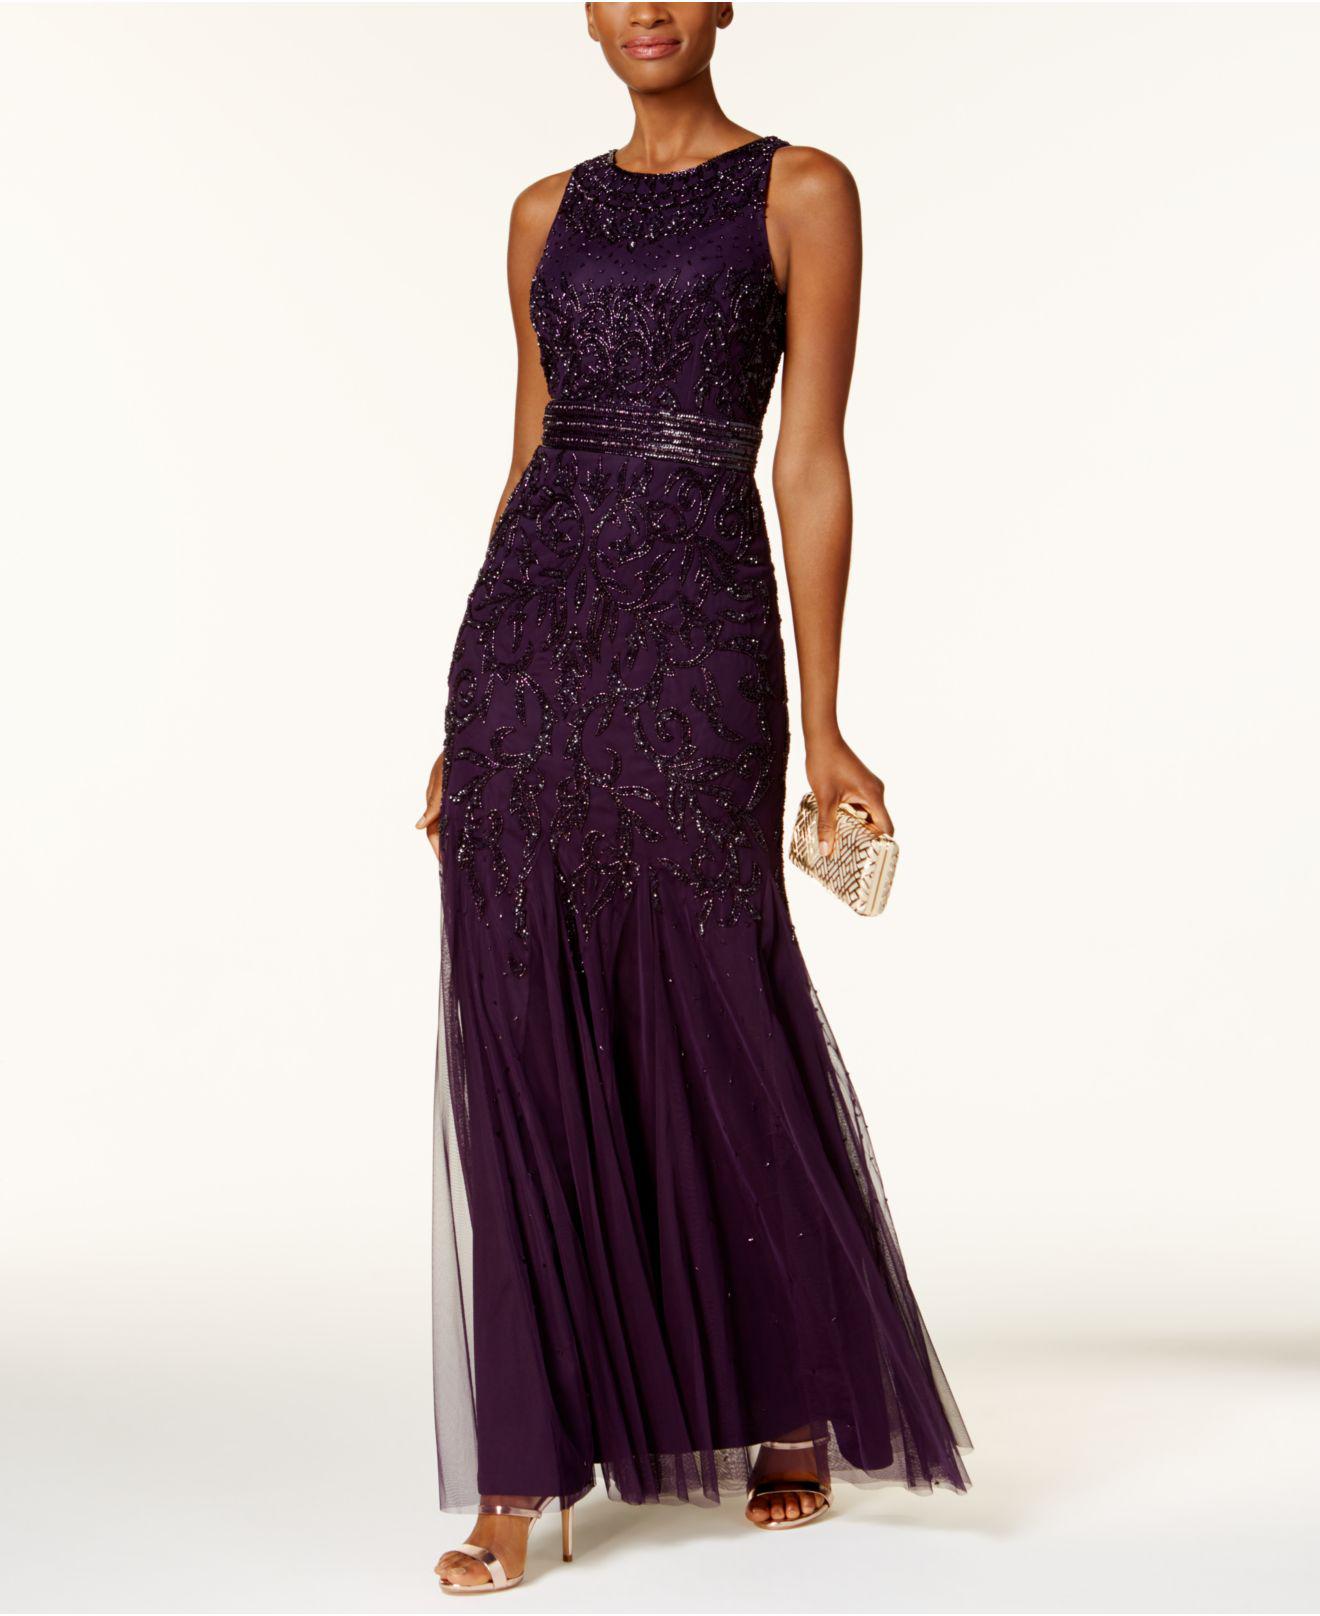 Adrianna Papell Synthetic Beaded Mesh Gown in Amethyst (Purple) - Lyst